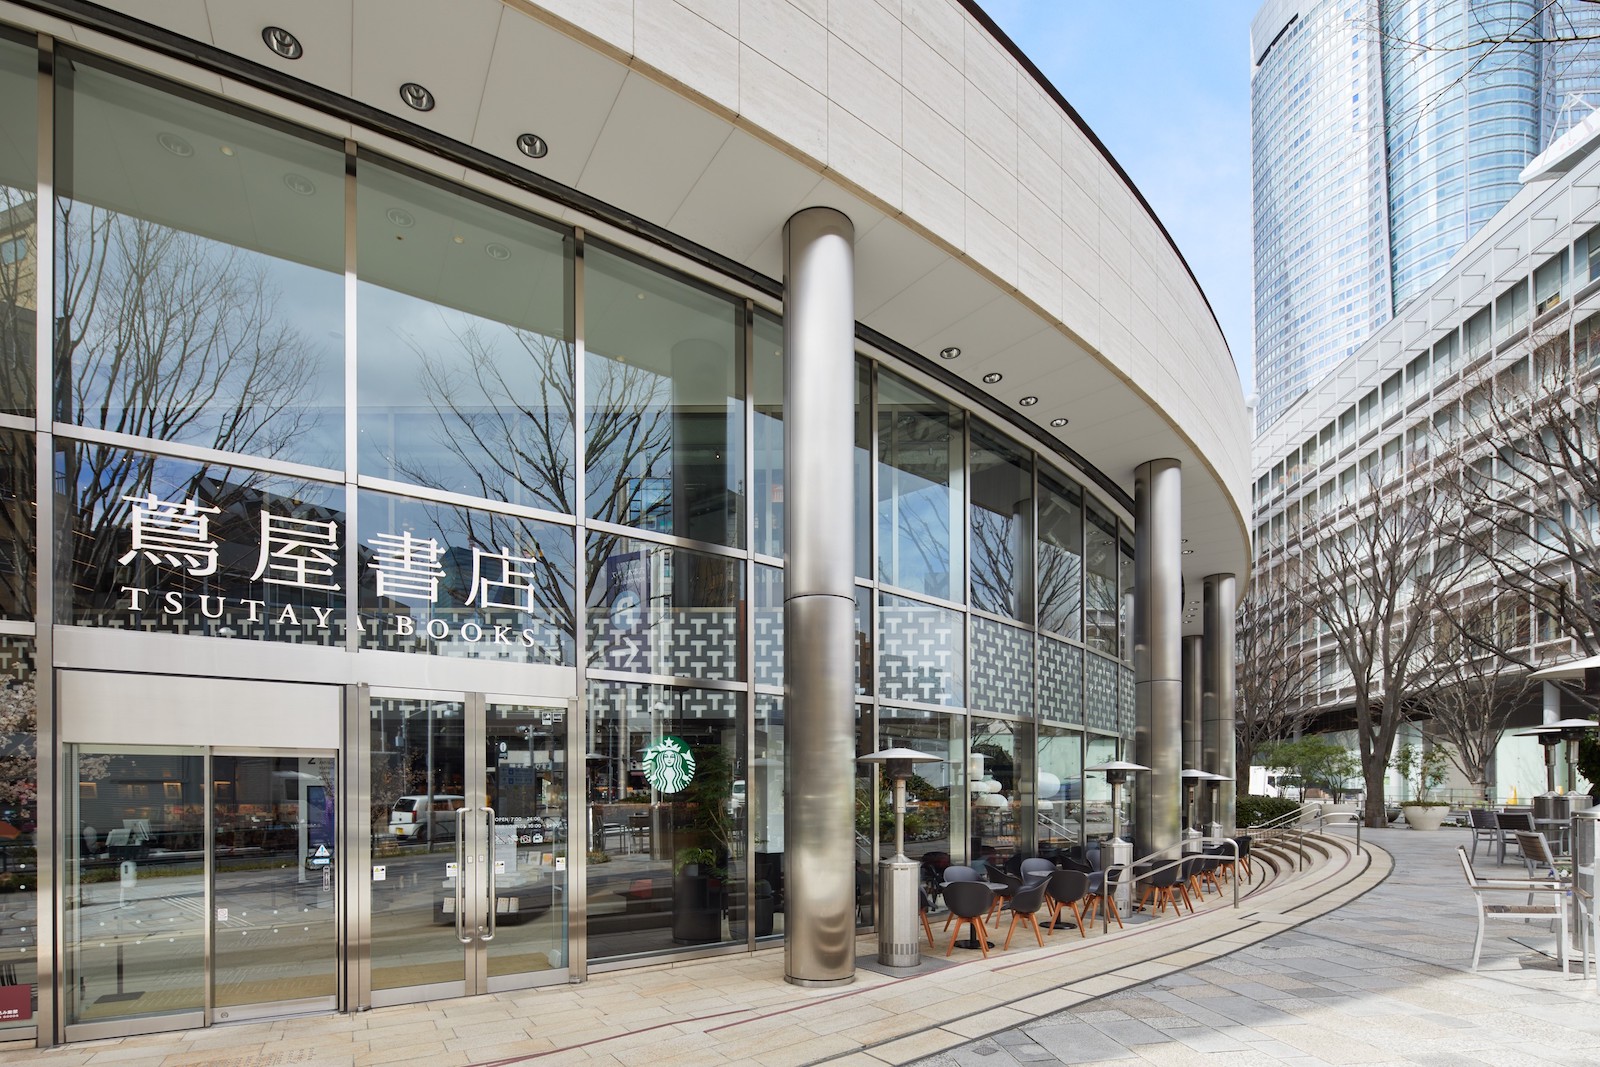 Tsutaya Tokyo Roppongi Reopens With Brand New Look Concept